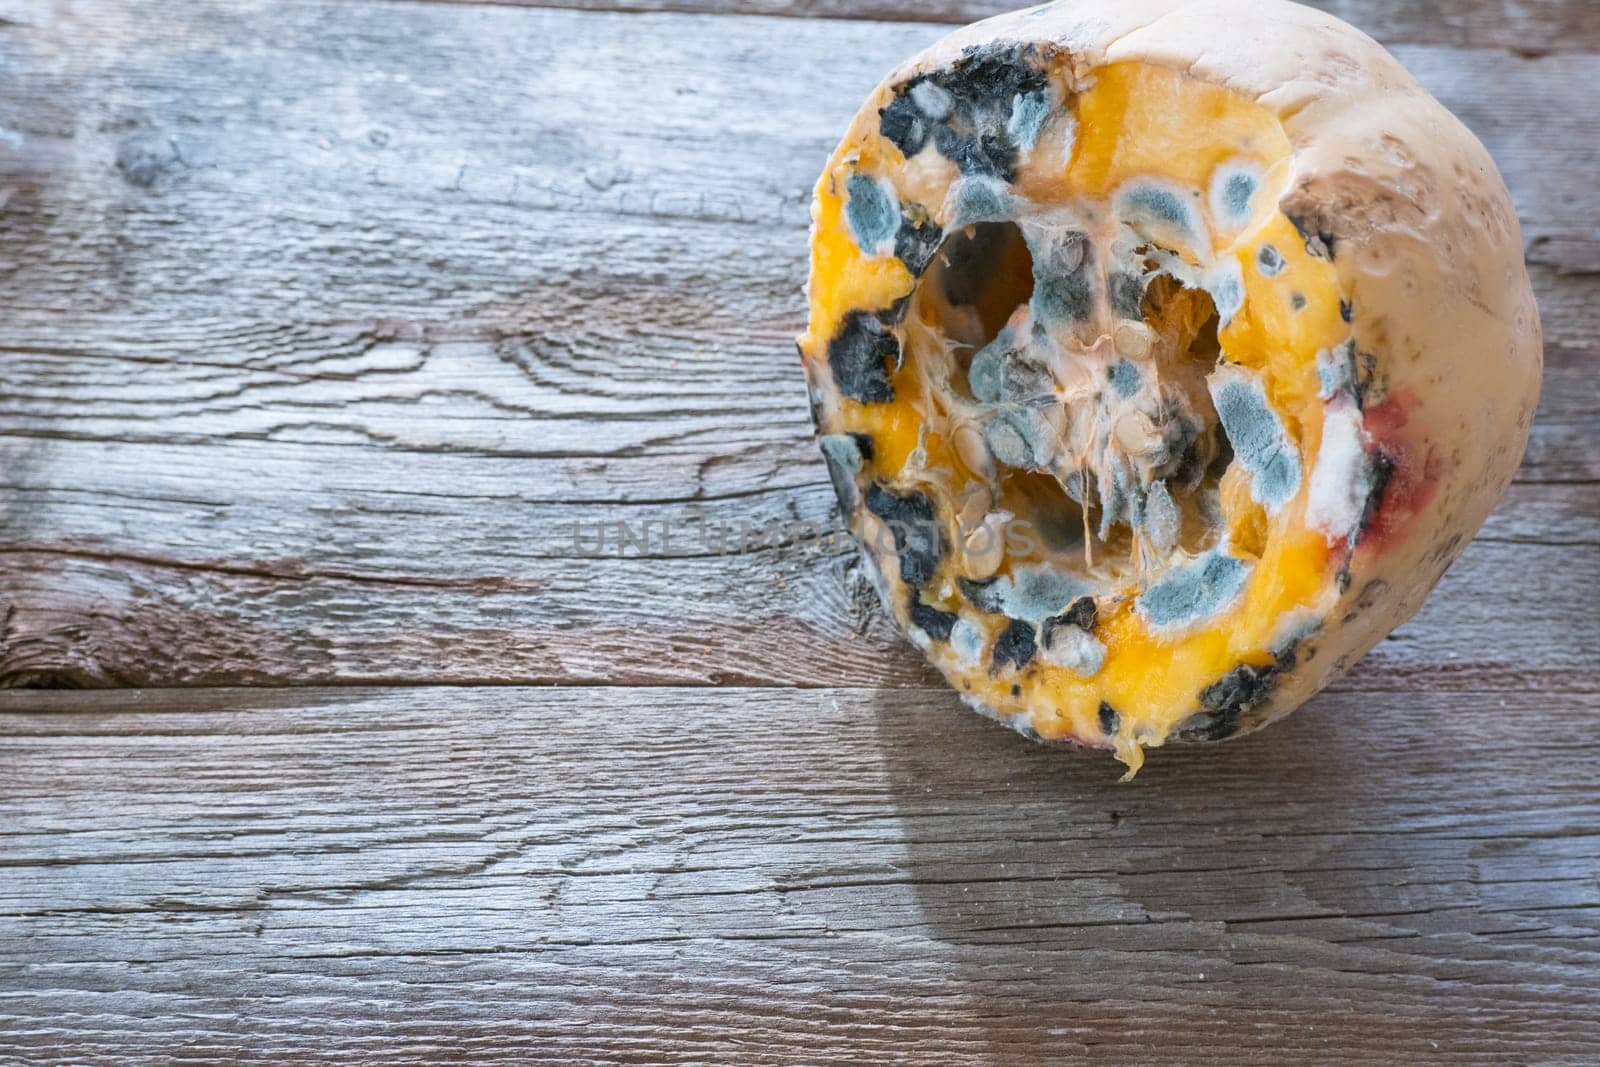 Orange moldy pumpkin on a wooden background. Mold and fungi on food, mold development, pests of stored vegetable products, a common problem. by Ekaterina34